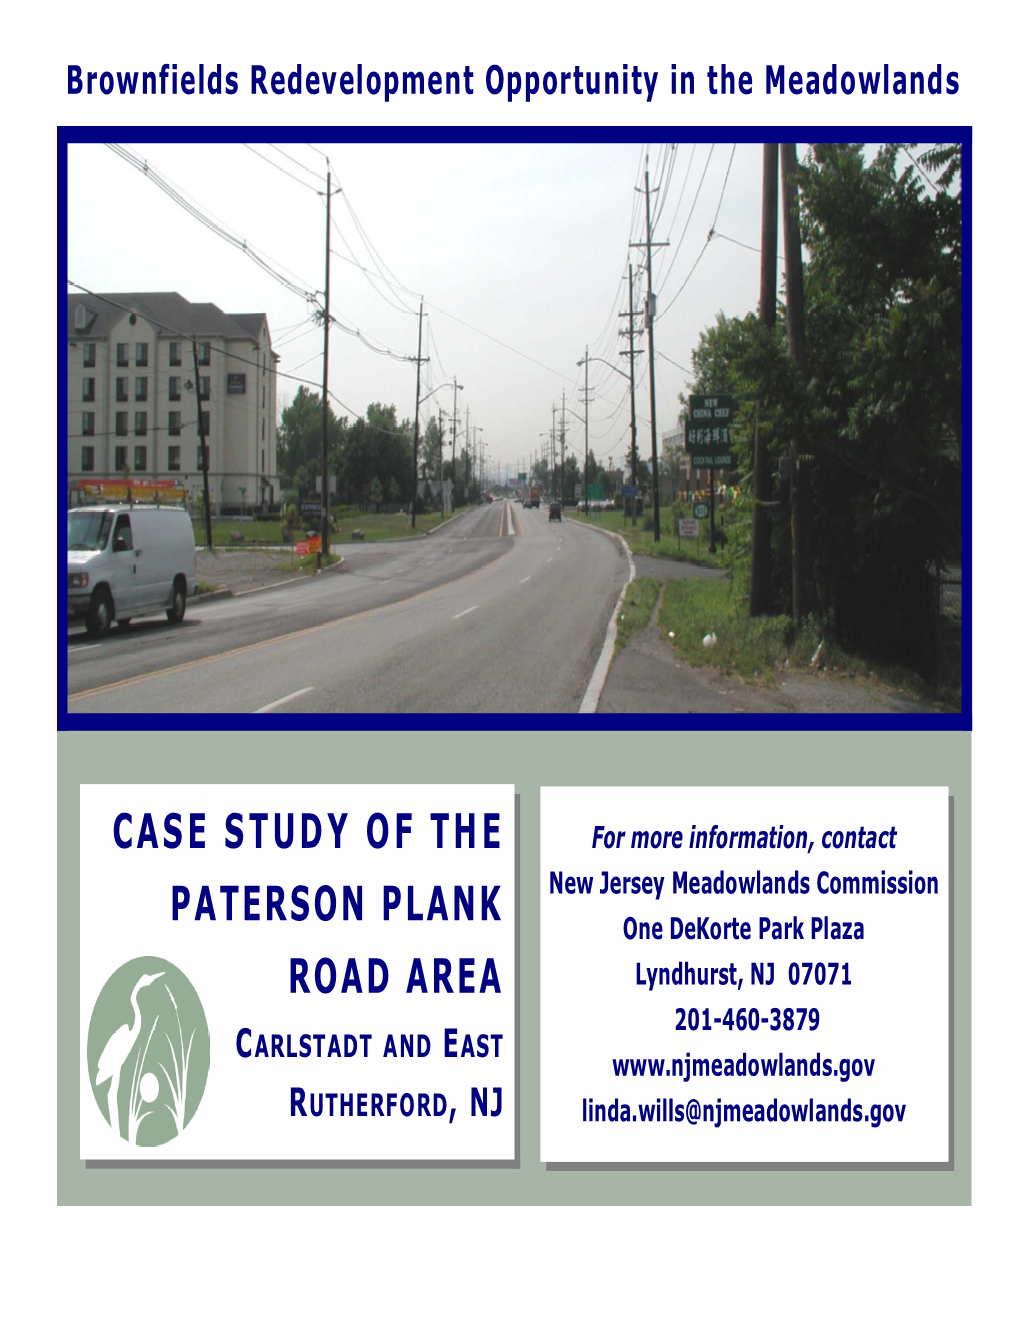 Case Study of the Paterson Plank Road Area